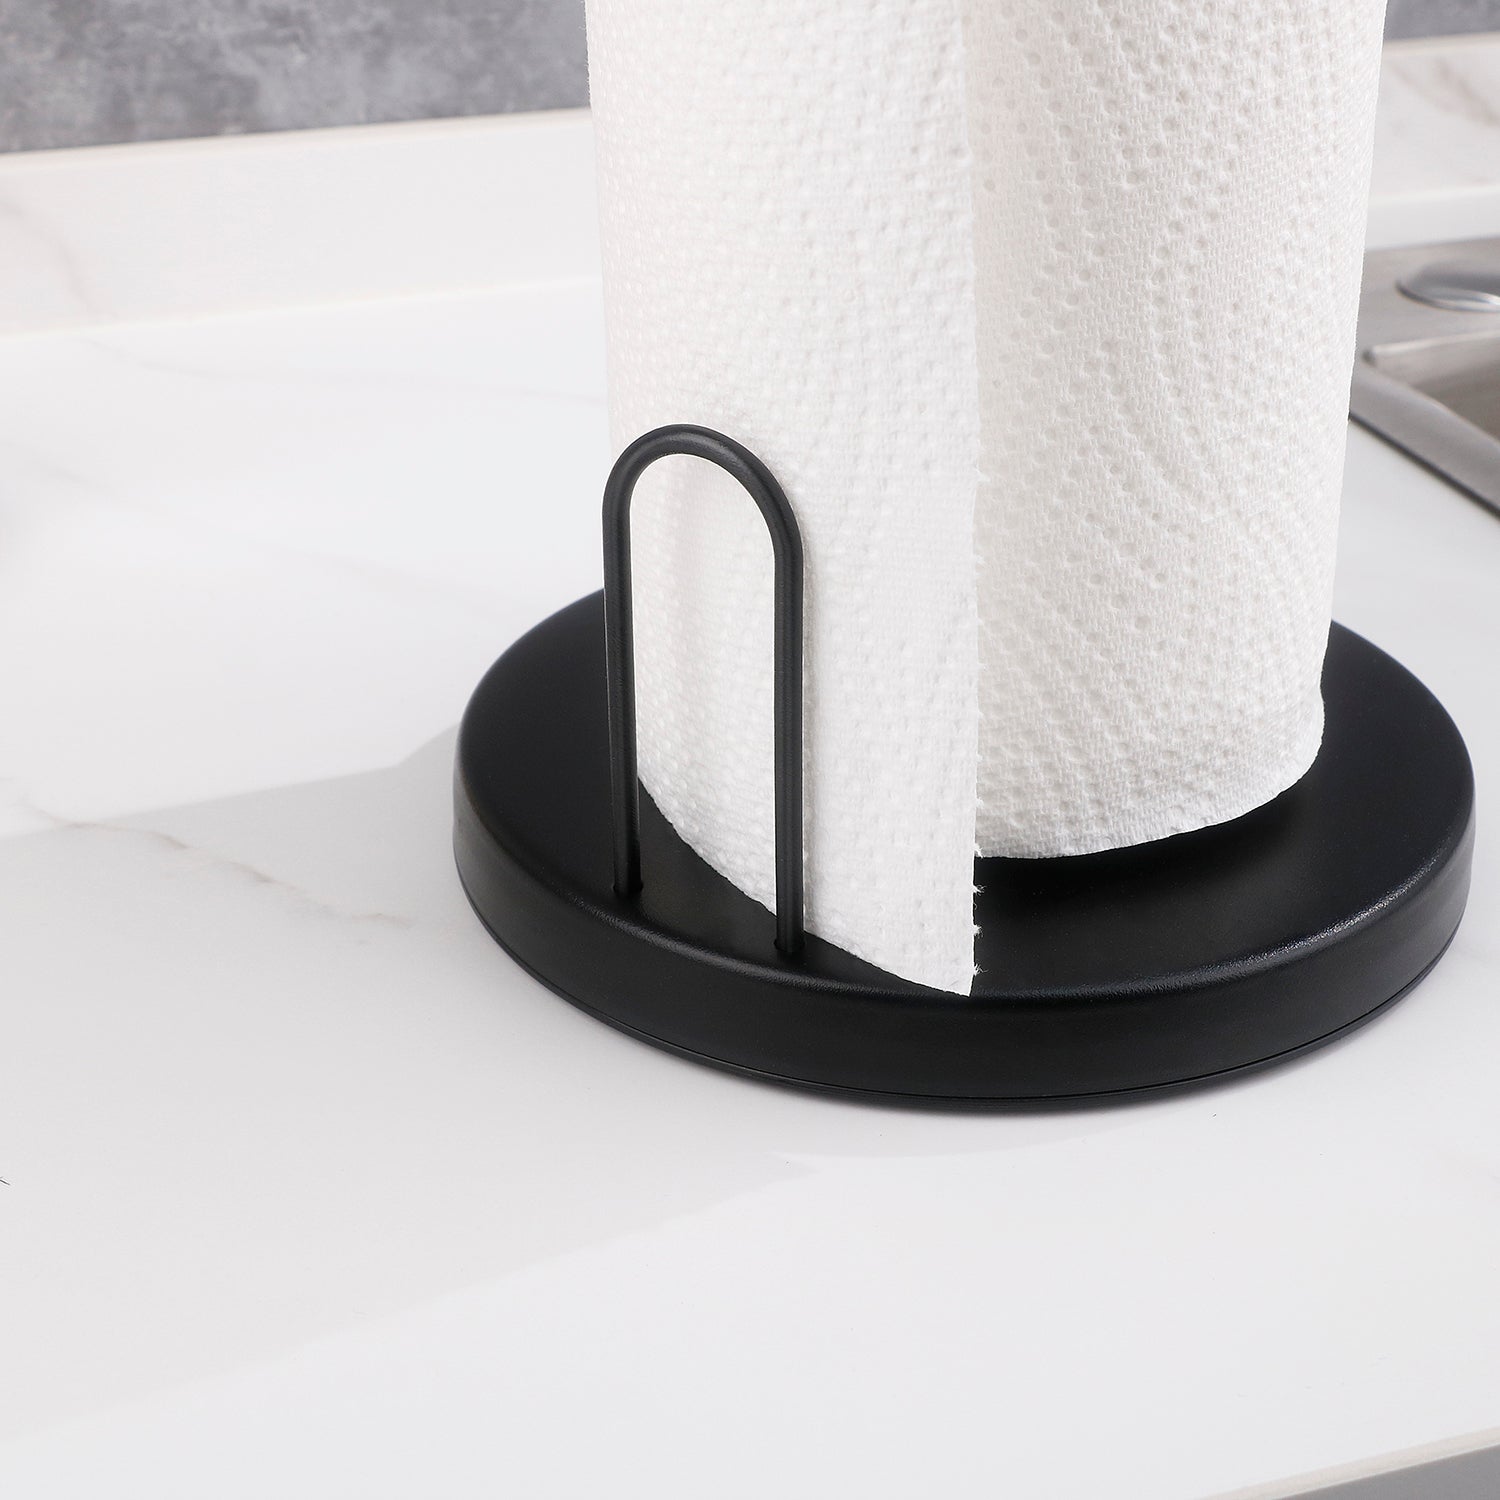 Koovon Paper Towel Holder Countertop, Paper Towel Stand with Ratchet System for Kitchen Bathroom, One-Handed Tear Paper Stainless Steel Paper Towel